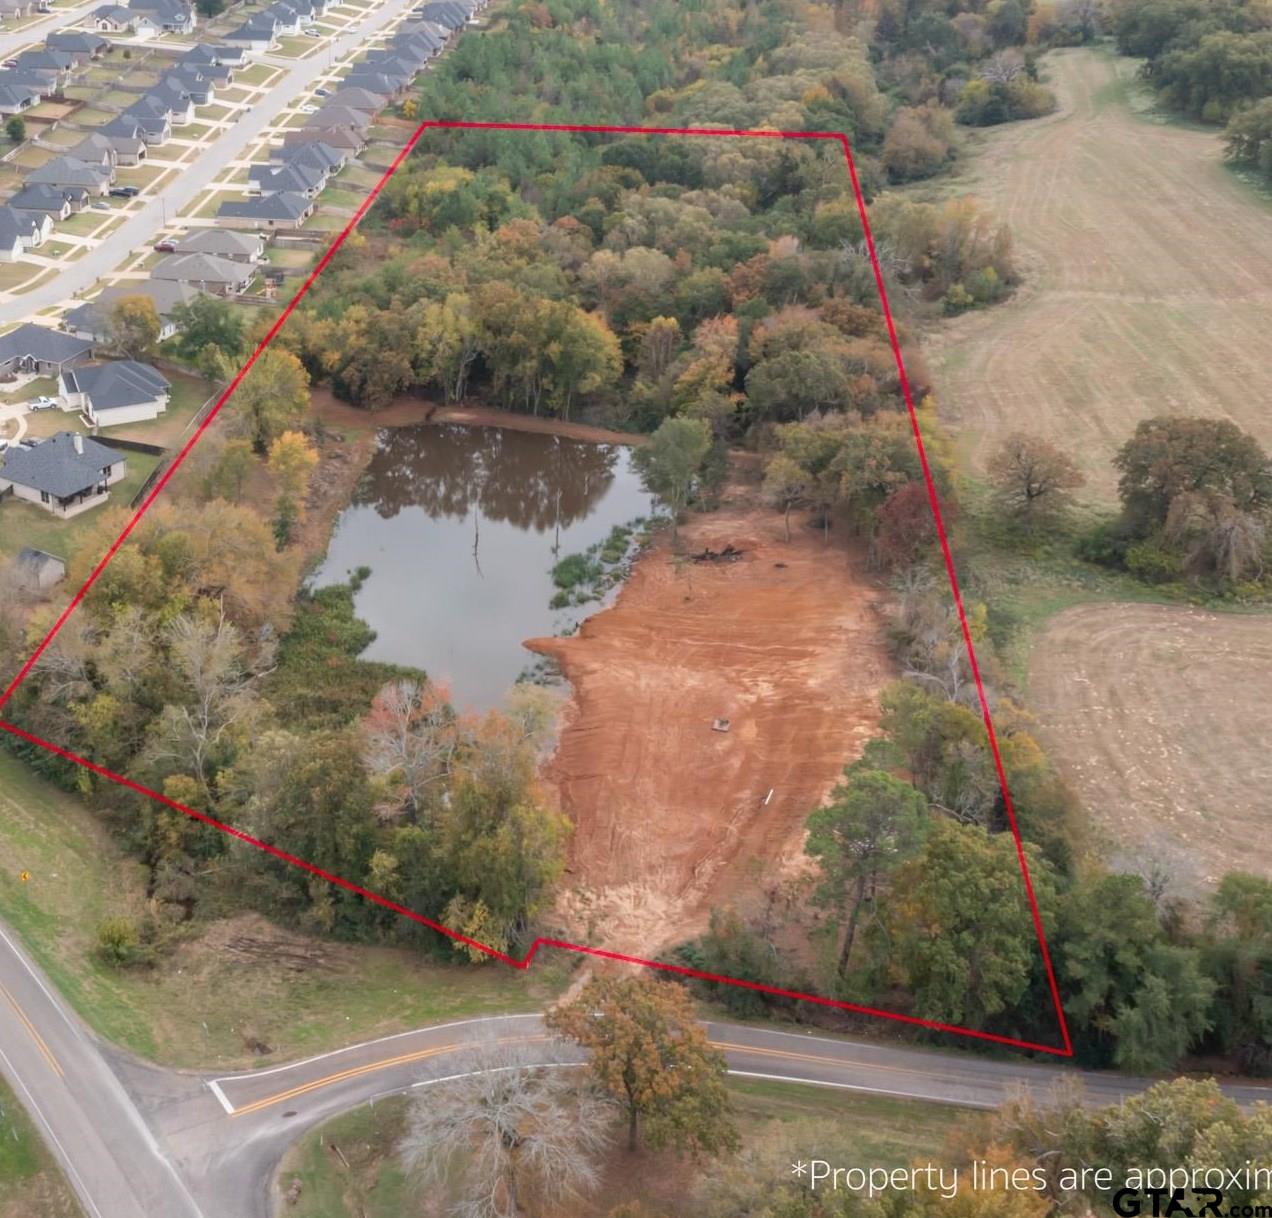 8.234 Acres. Stocked 2 acre pond, Building pad in place.